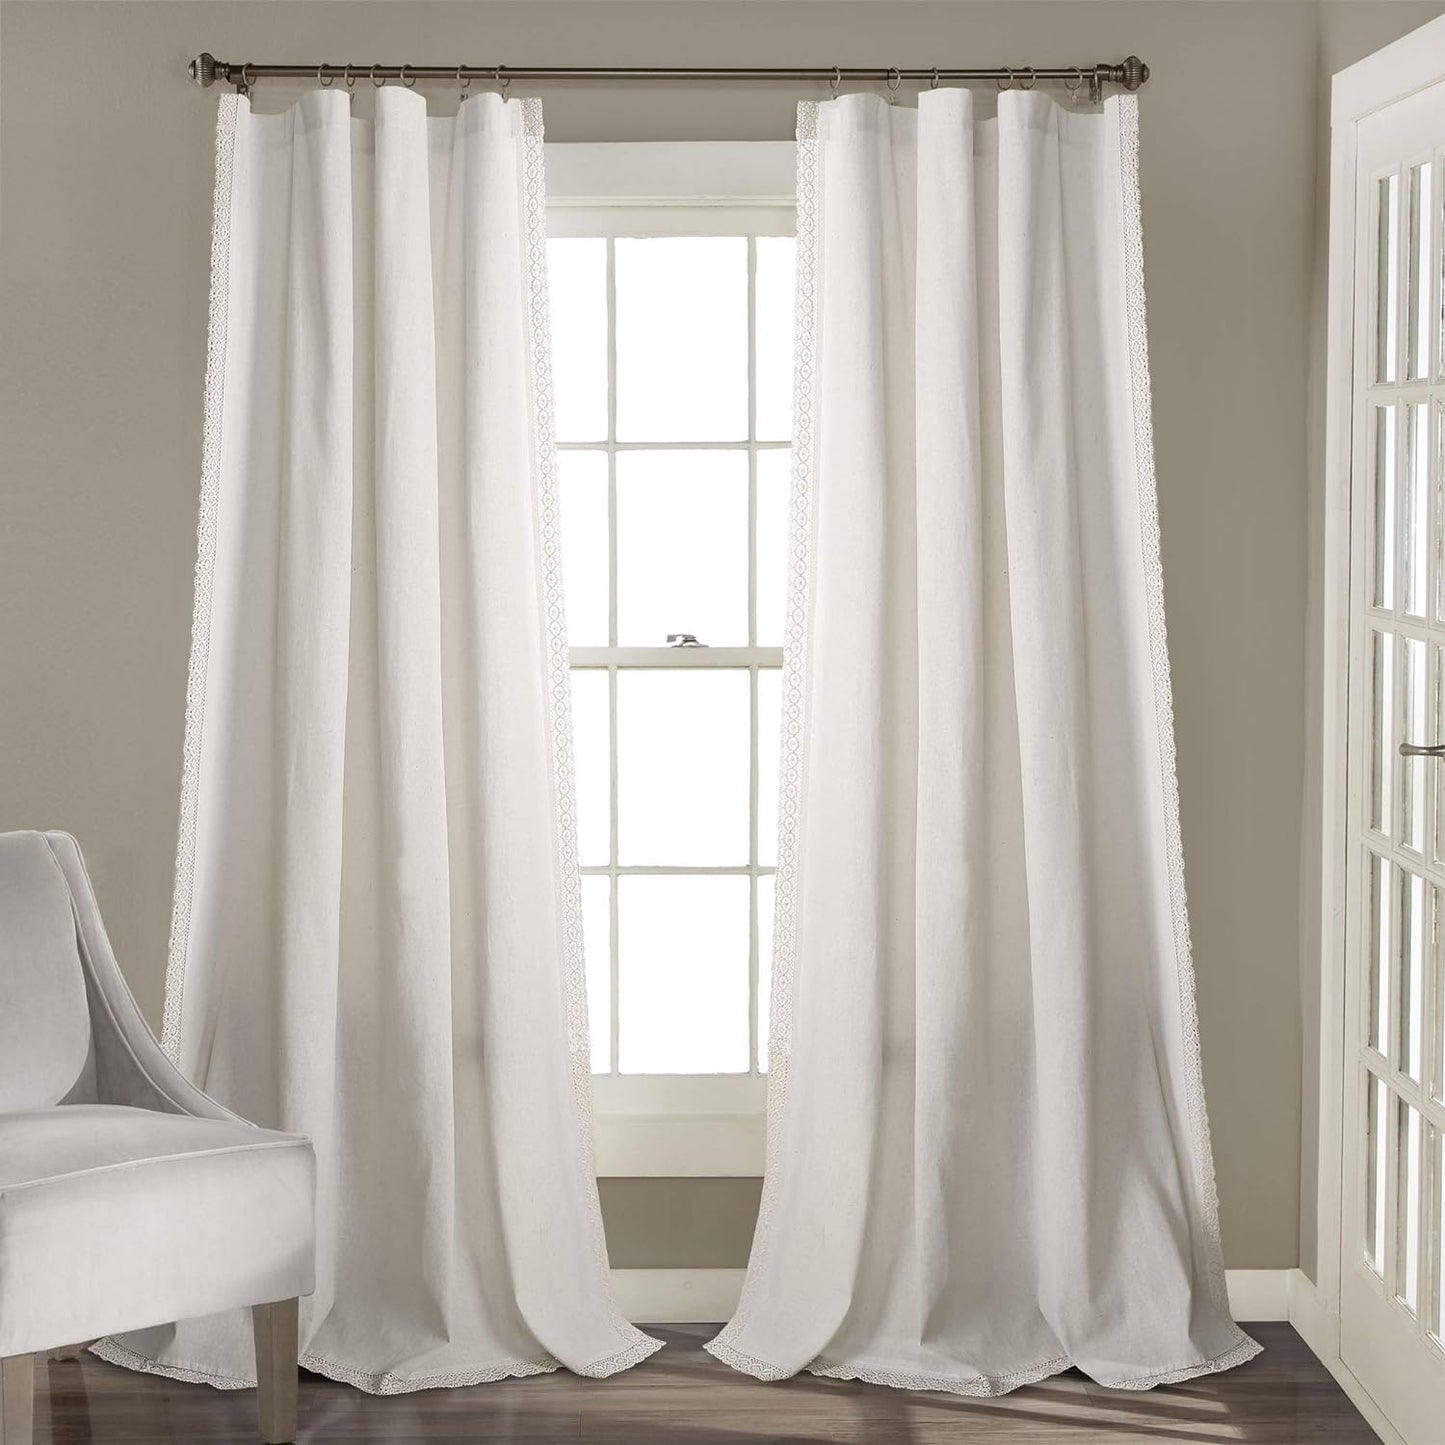 Lush Decor Rosalie Light Filtering Window Curtain Panel Set- Pair- Vintage Farmhouse & French Country Style Curtains - Timeless Dreamy Drape - Romantic Lace Trim - 54" W X 84" L, White  Triangle Home Fashions White Window Panel 54"W X 95"L